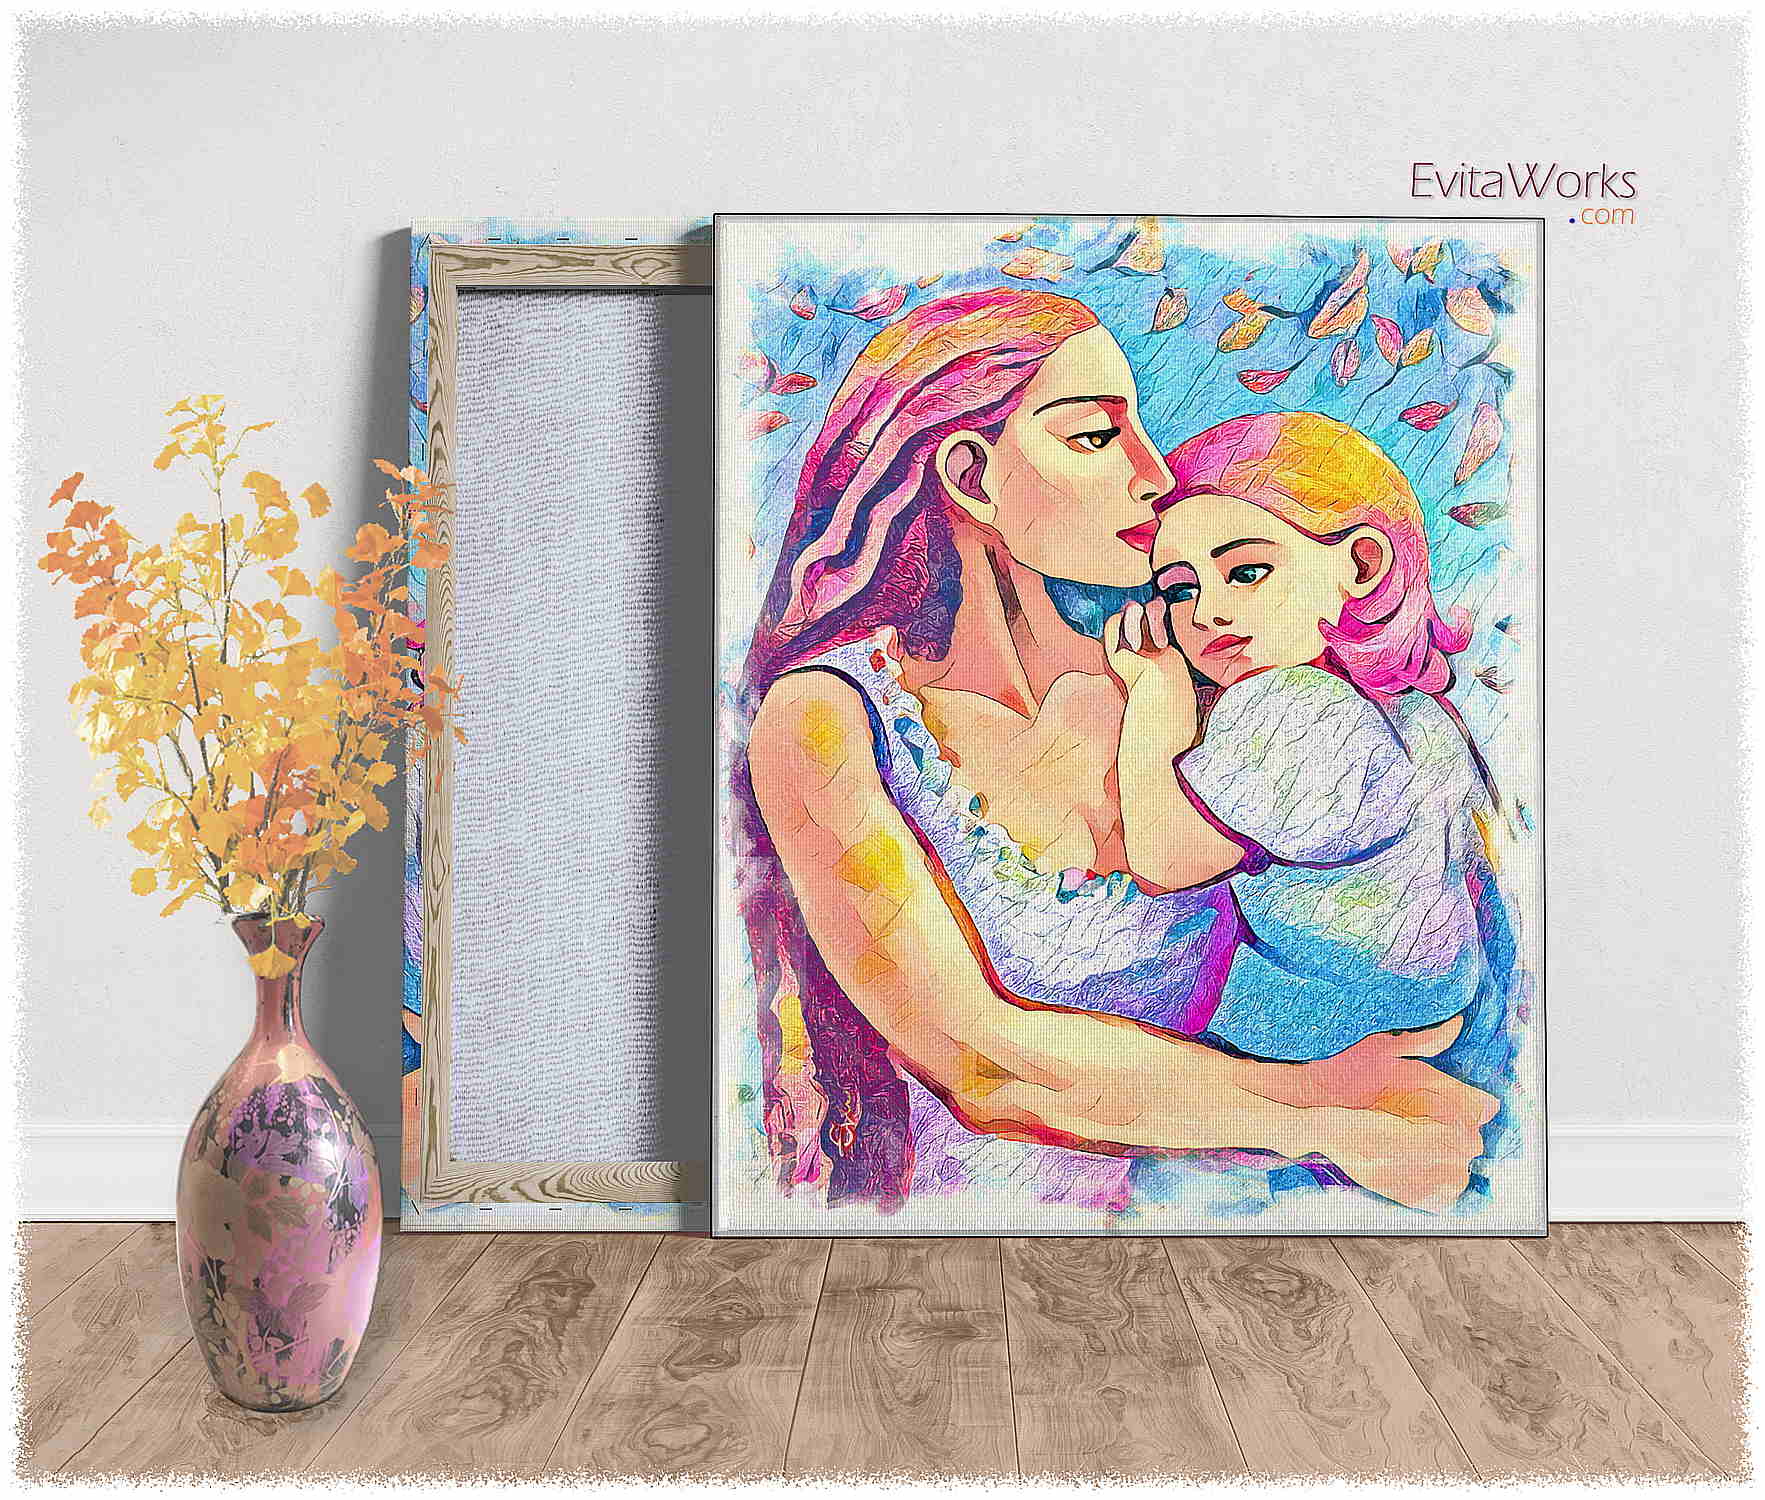 ea mother and child cs ~ EvitaWorks